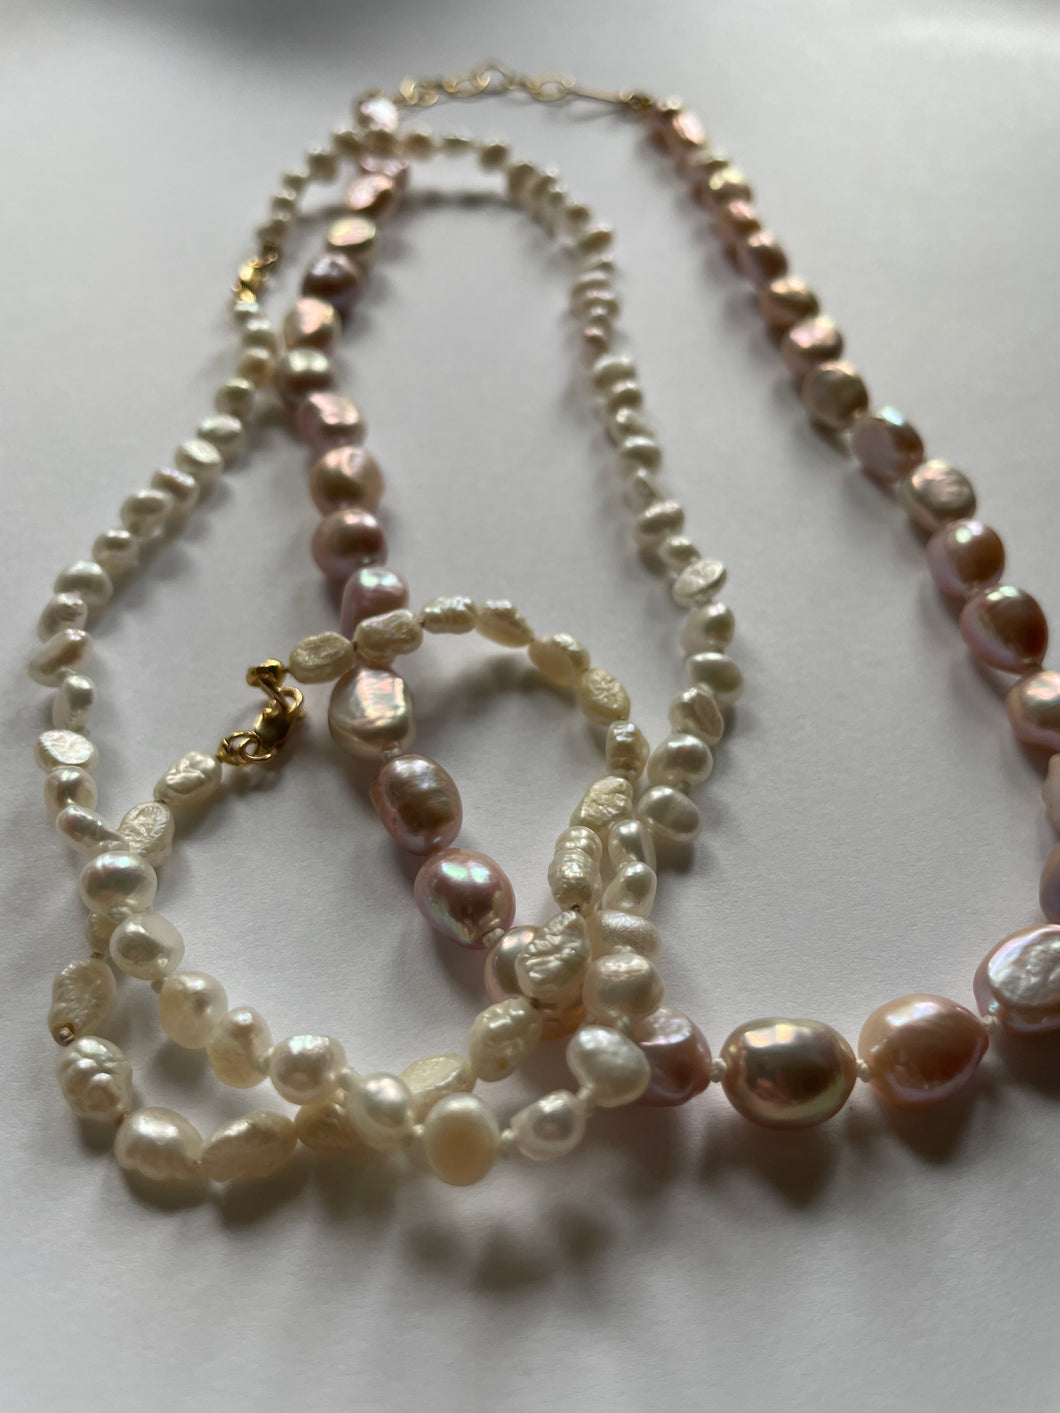 Pearl Knotting (Ages 18+)